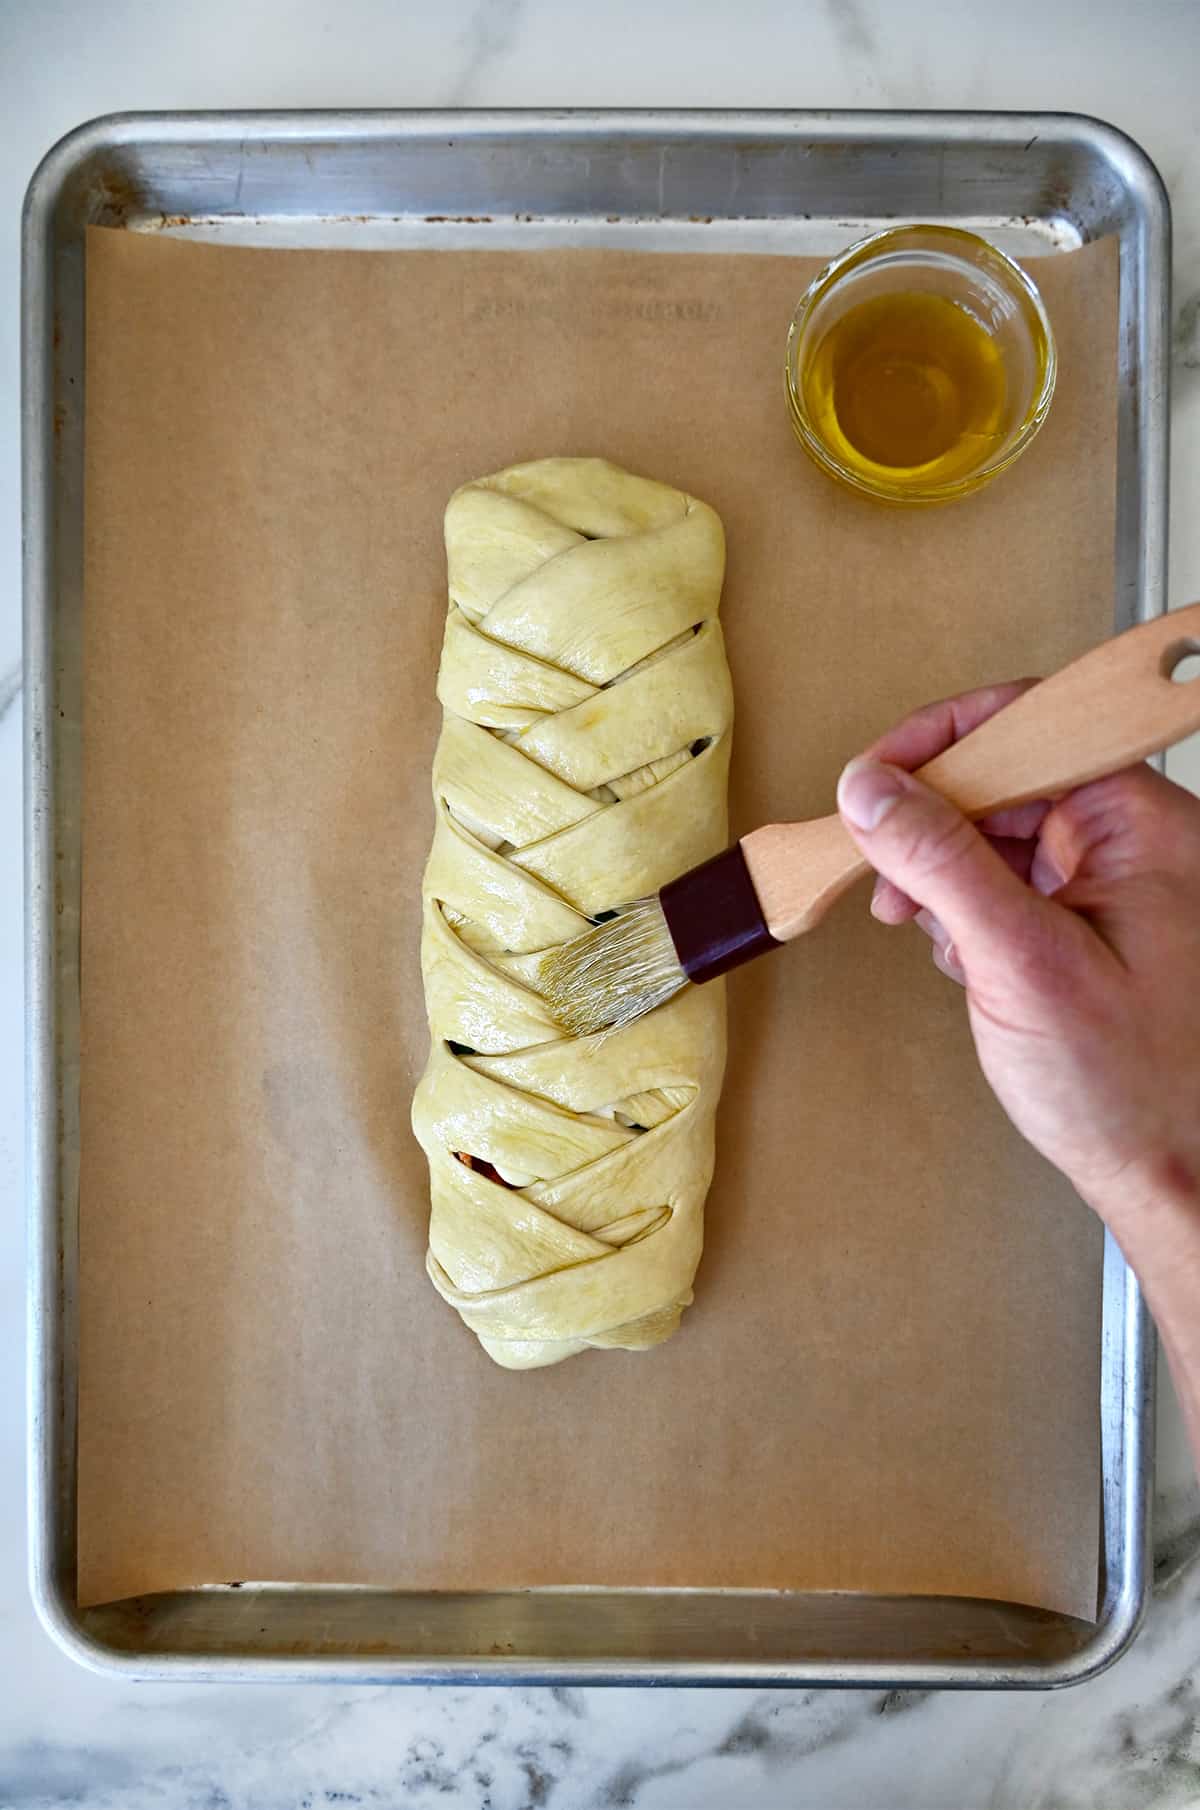 A hand holding a pastry brush applies olive oil to a braided pizza bread on a parchment paper-lined baking sheet.